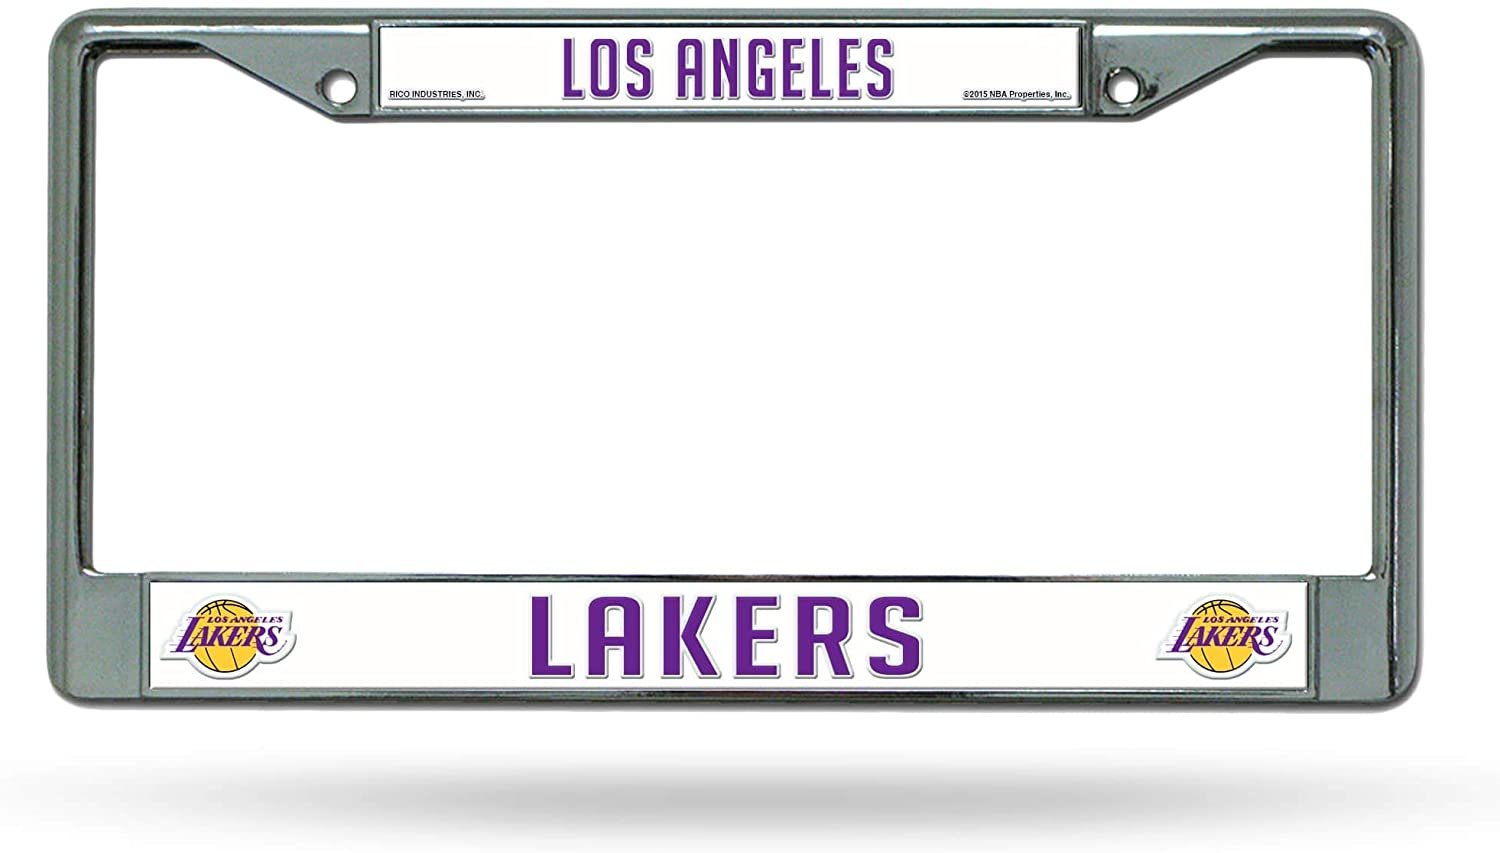 Los Angeles Lakers Premium Metal License Plate Frame Chrome Tag Cover, 12x6 Inch